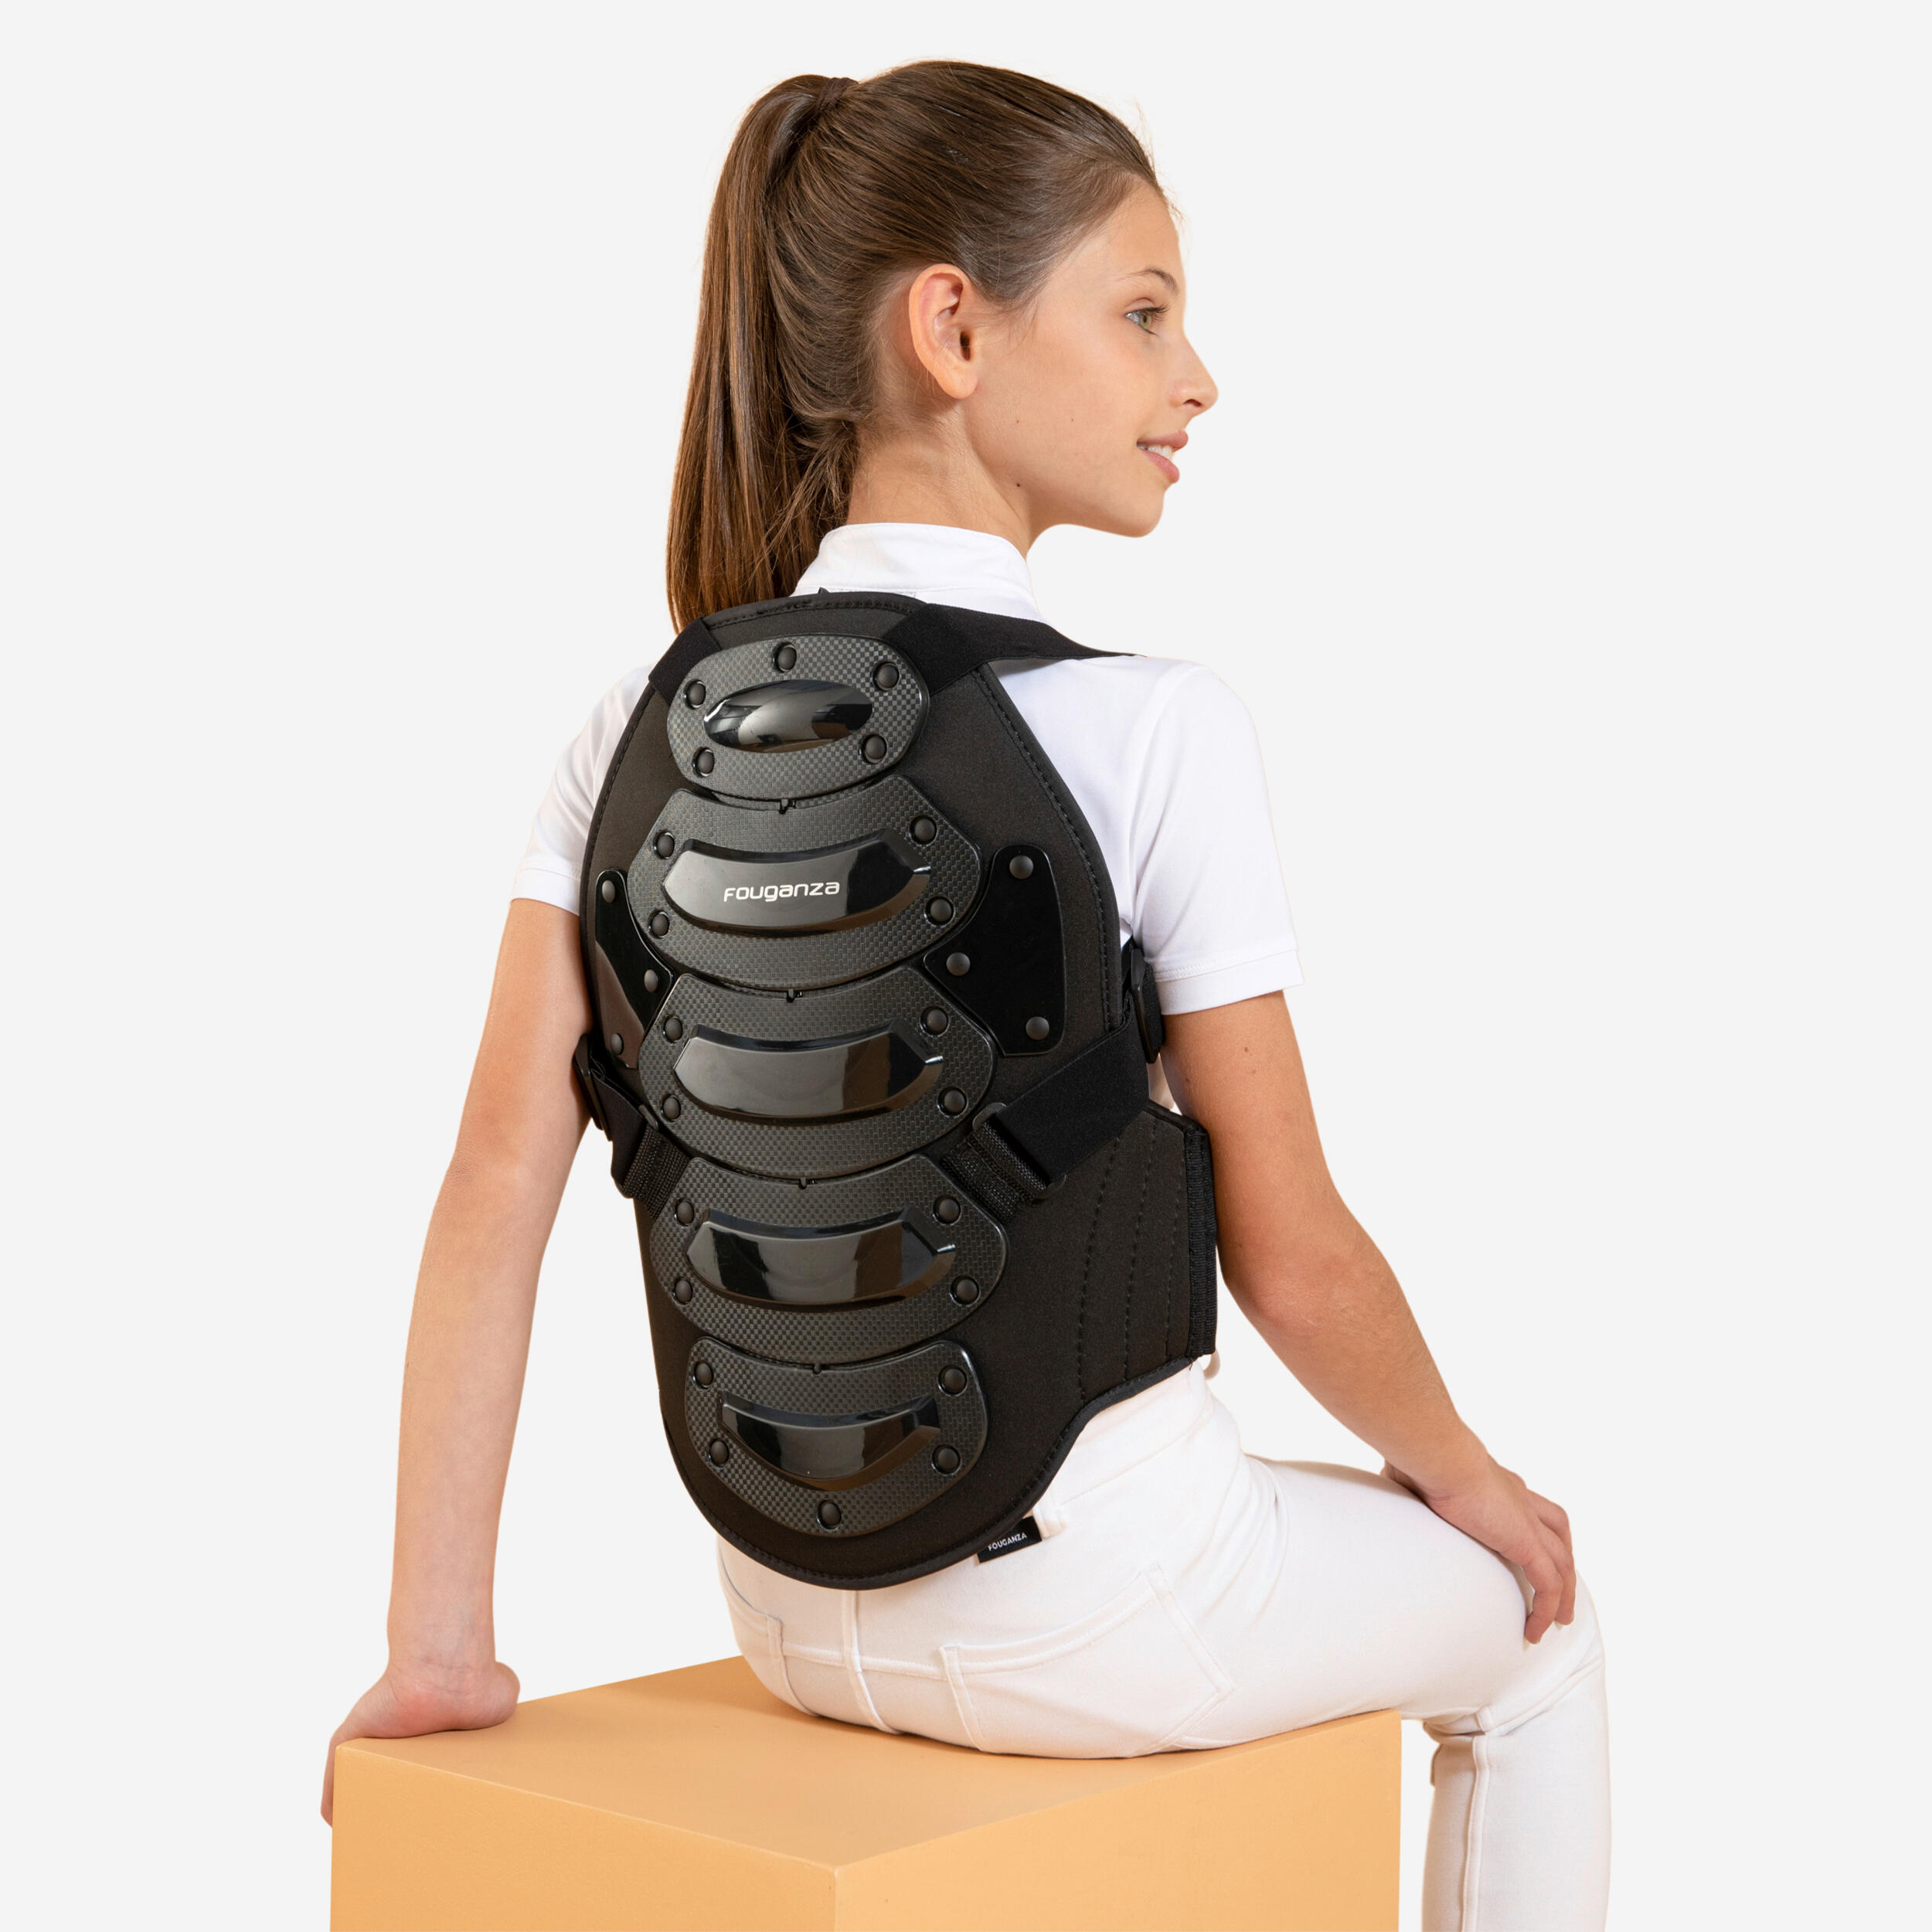 Kids' Horse Riding Back Protector Safety - Black 1/4